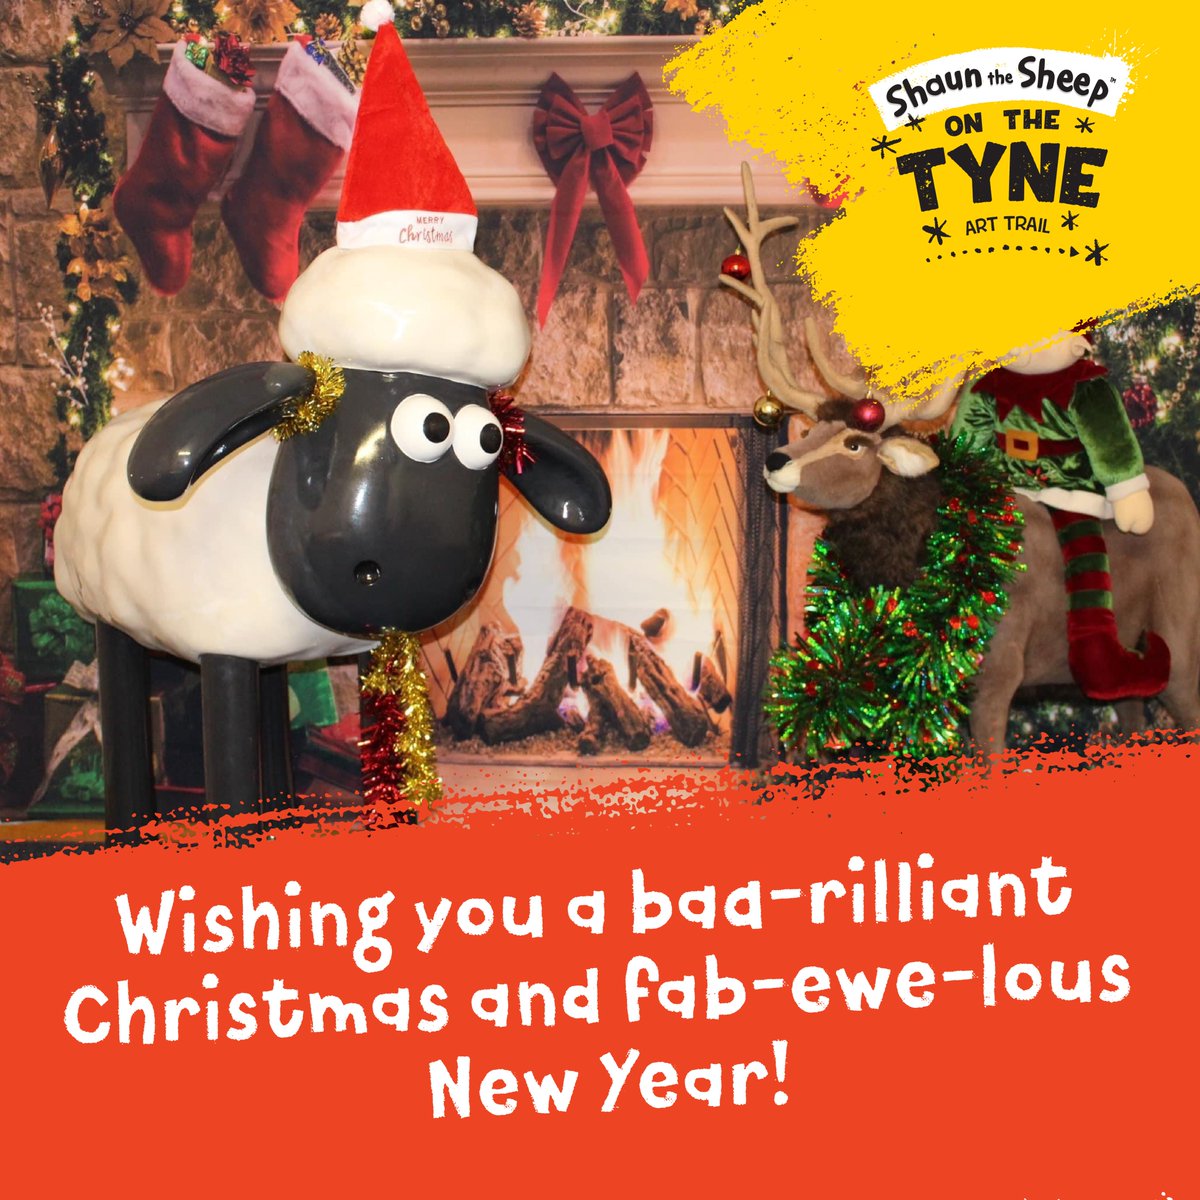 2023 was undoubtedly the Year of the Sheep and we want to say a big thank you for being part of the adventure. 🐑 Our Shaun's are all settled in their new homes, with over £310,000 raised for @stoswaldsuk 🙌 Wishing you a baa-rilliant Christmas and fab-ewe-lous New Year 💛